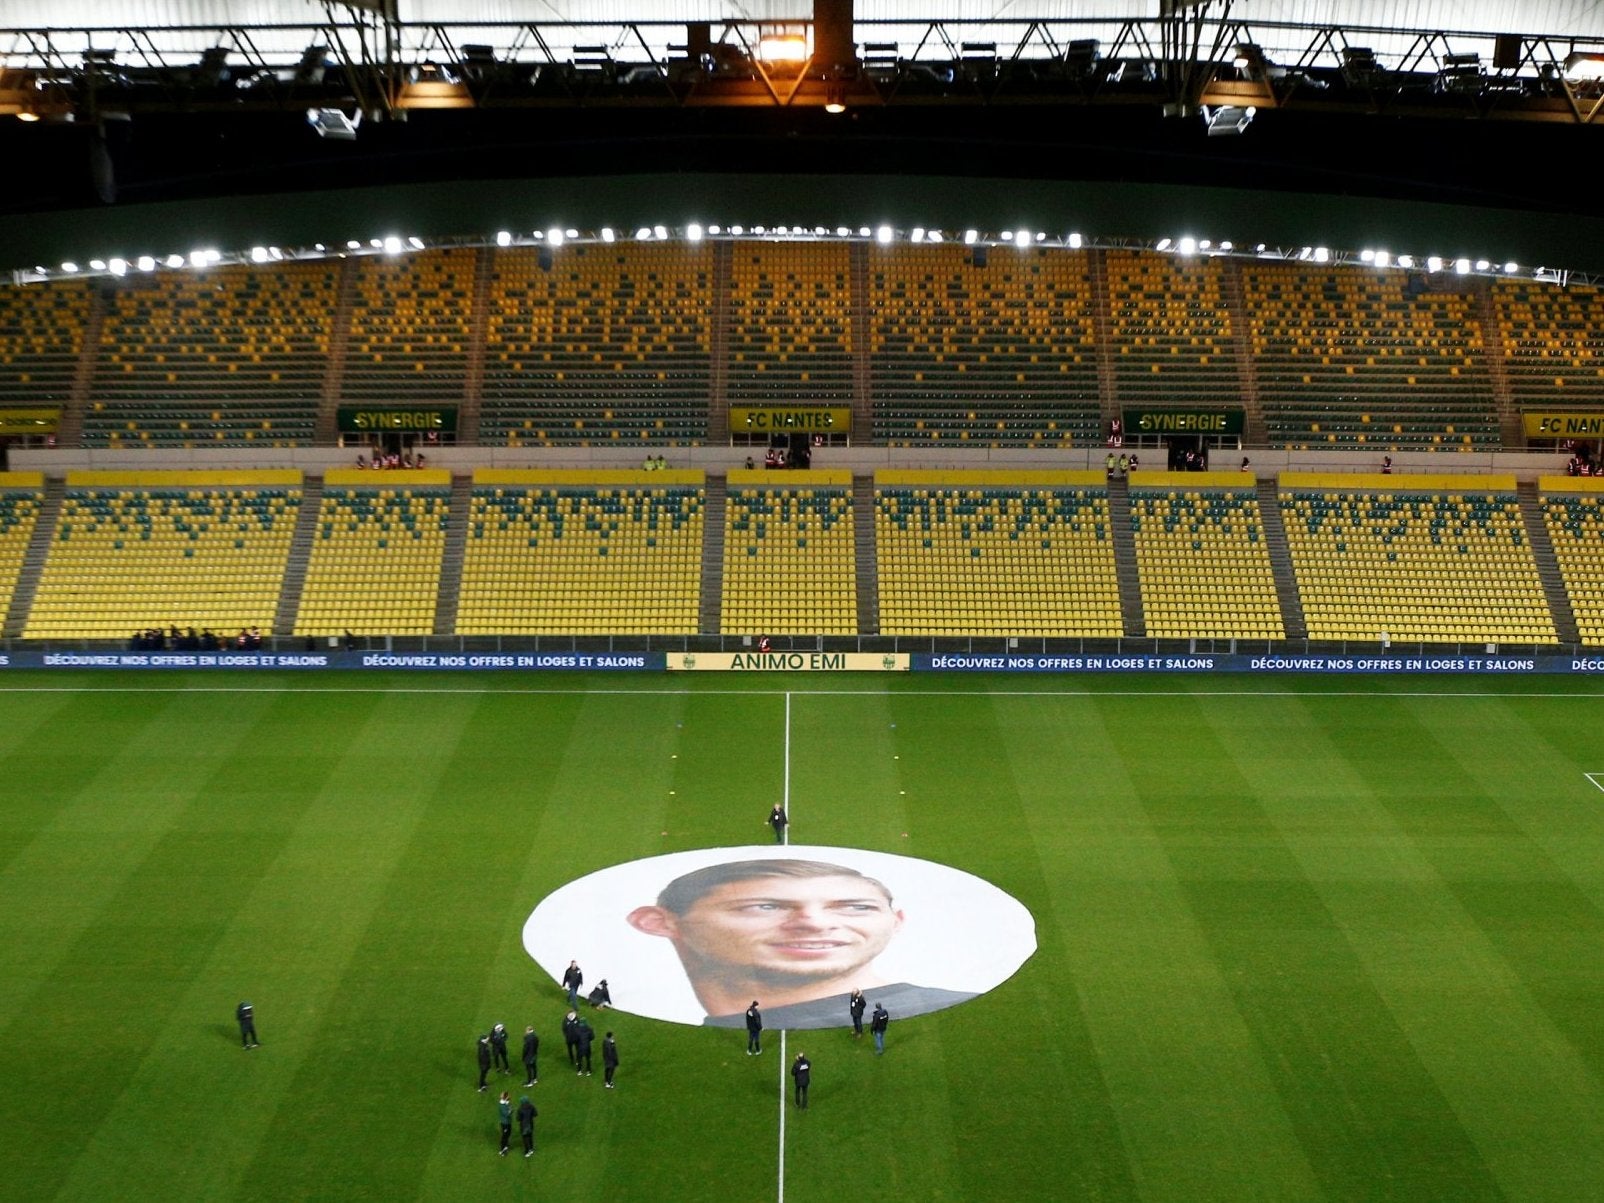 An image of Emiliano Sala is unfurled on the pitch in Nantes